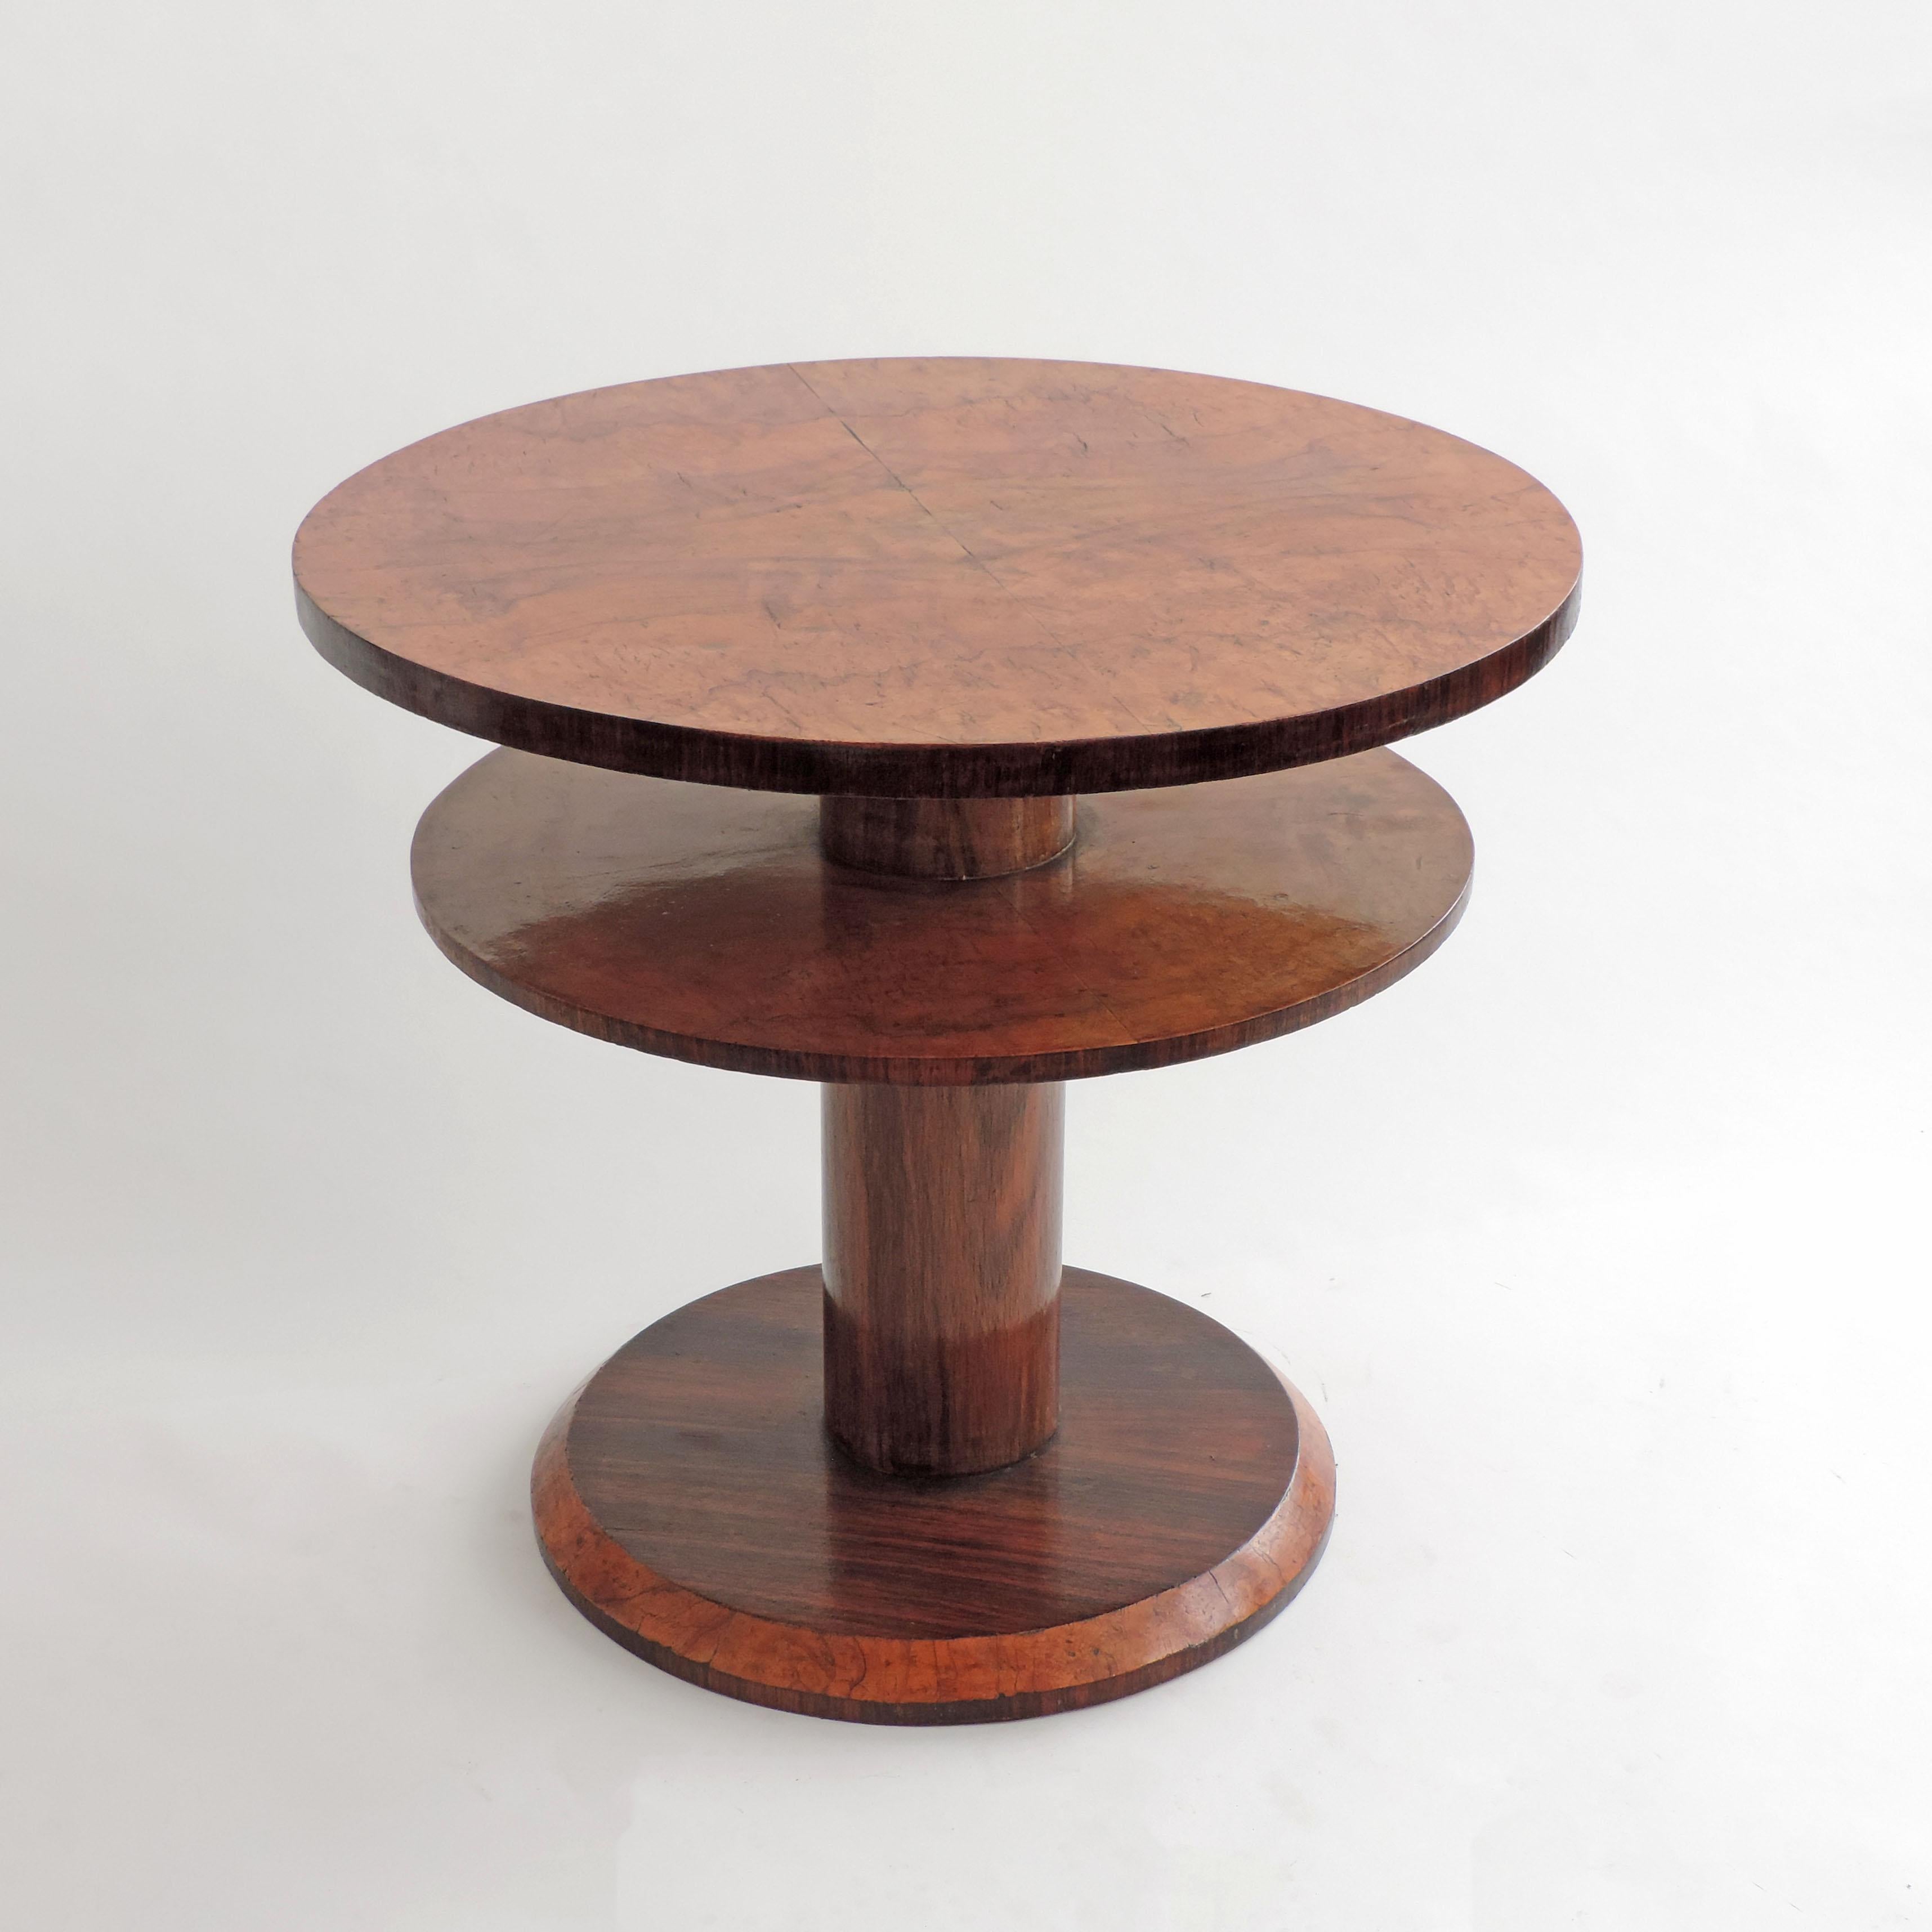 Art Deco Italian 1930s Two-Tier Round Wooden Coffee Table Attributed to Gio Ponti For Sale